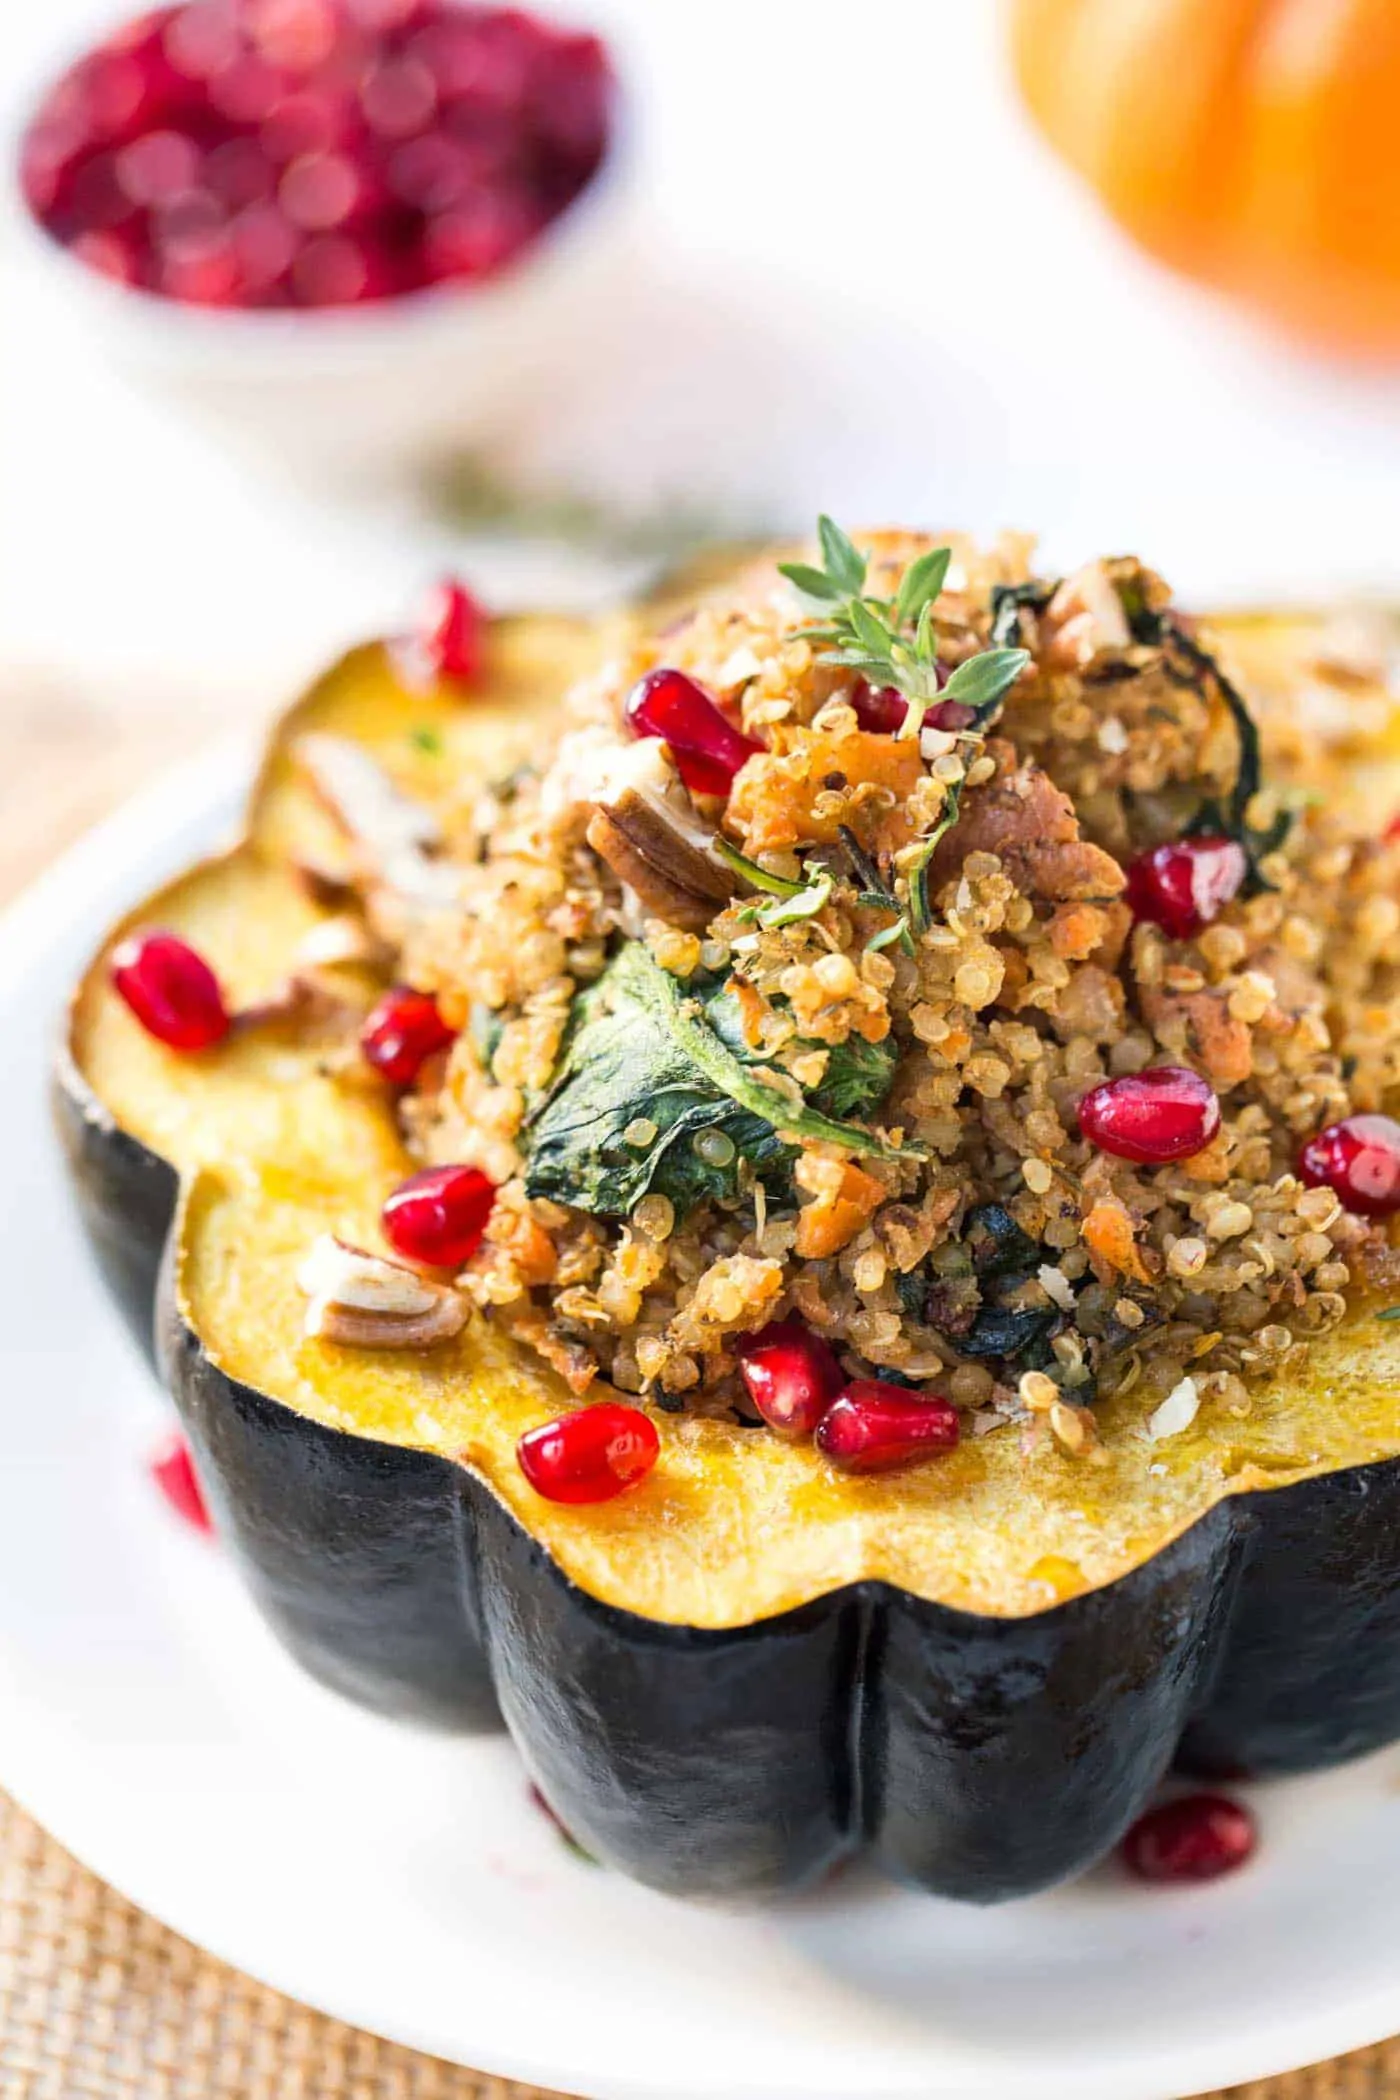 A mushroom stuffed acorn squash on a plate, garnished with pomegranate seeds, with a bowl of pomegranate seeds in the background